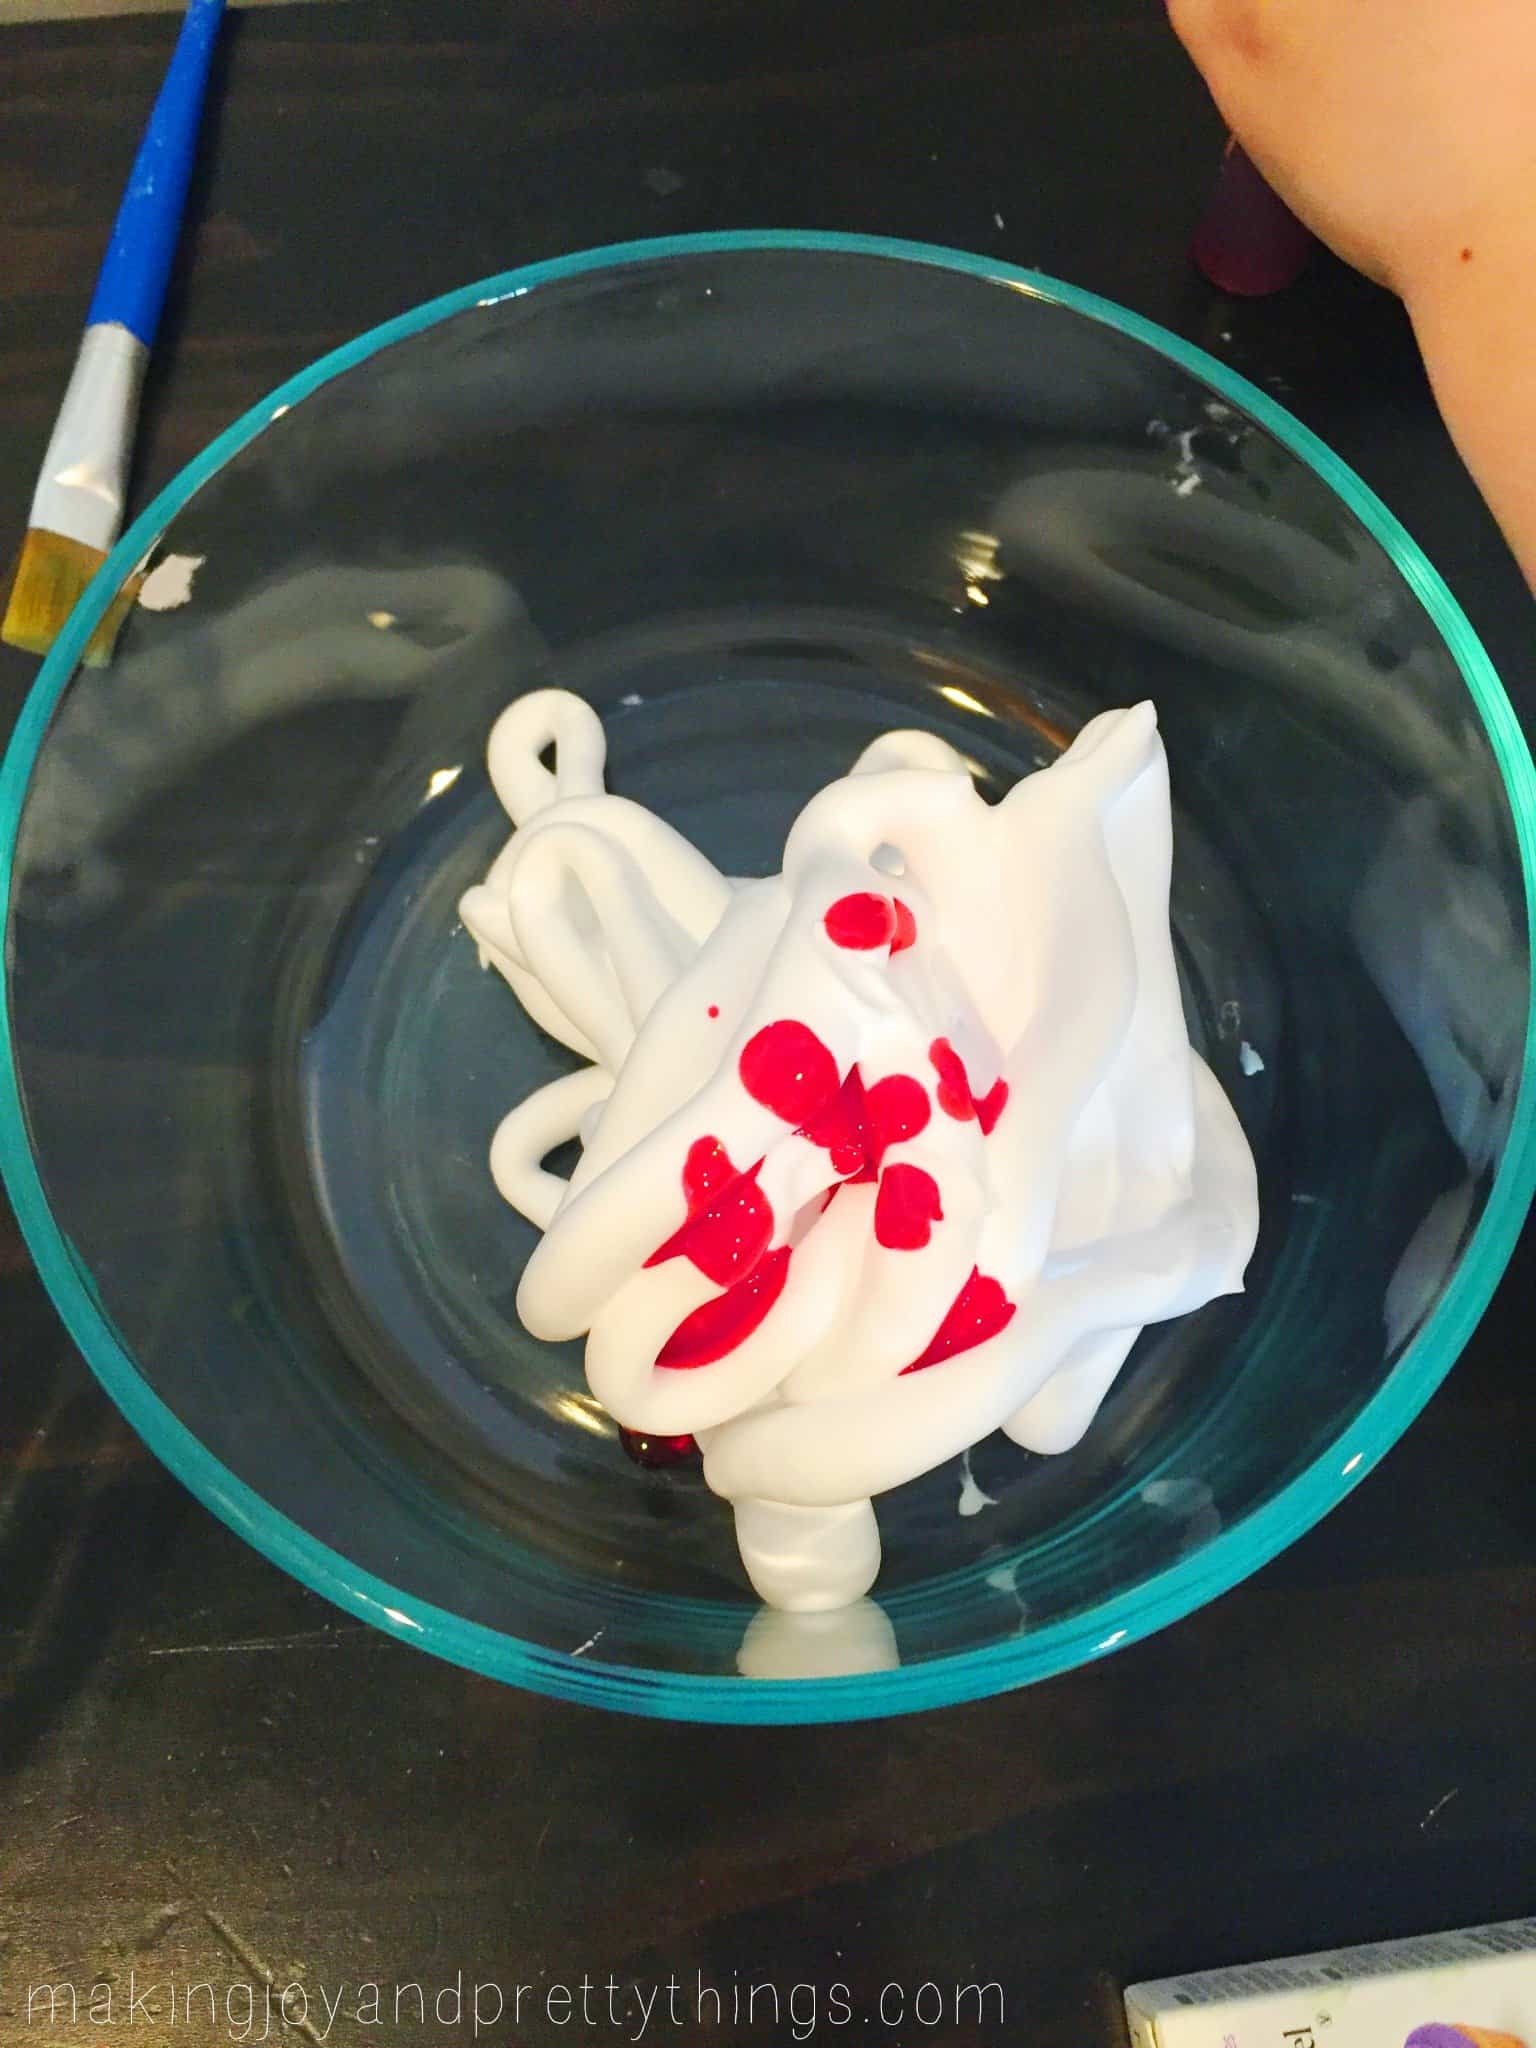 A glass bowl is filled with a pile of white shaving cream, dotted with a few drops of magenta pink gel food coloring.